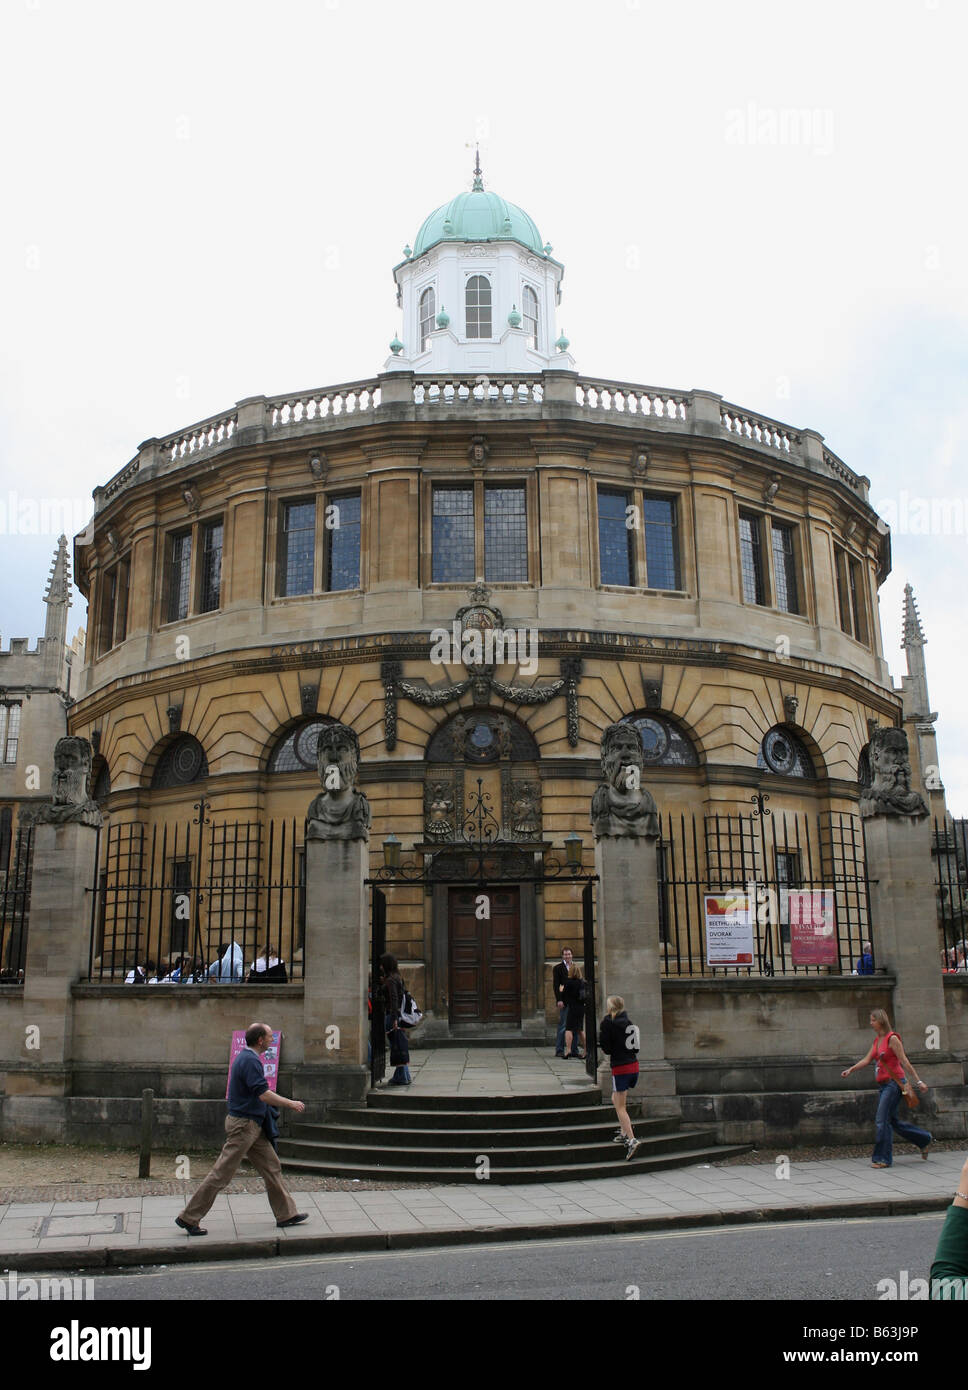 The Sheldonian Theatre Oxford England designed by Sir Christopher Wren Stock Photo